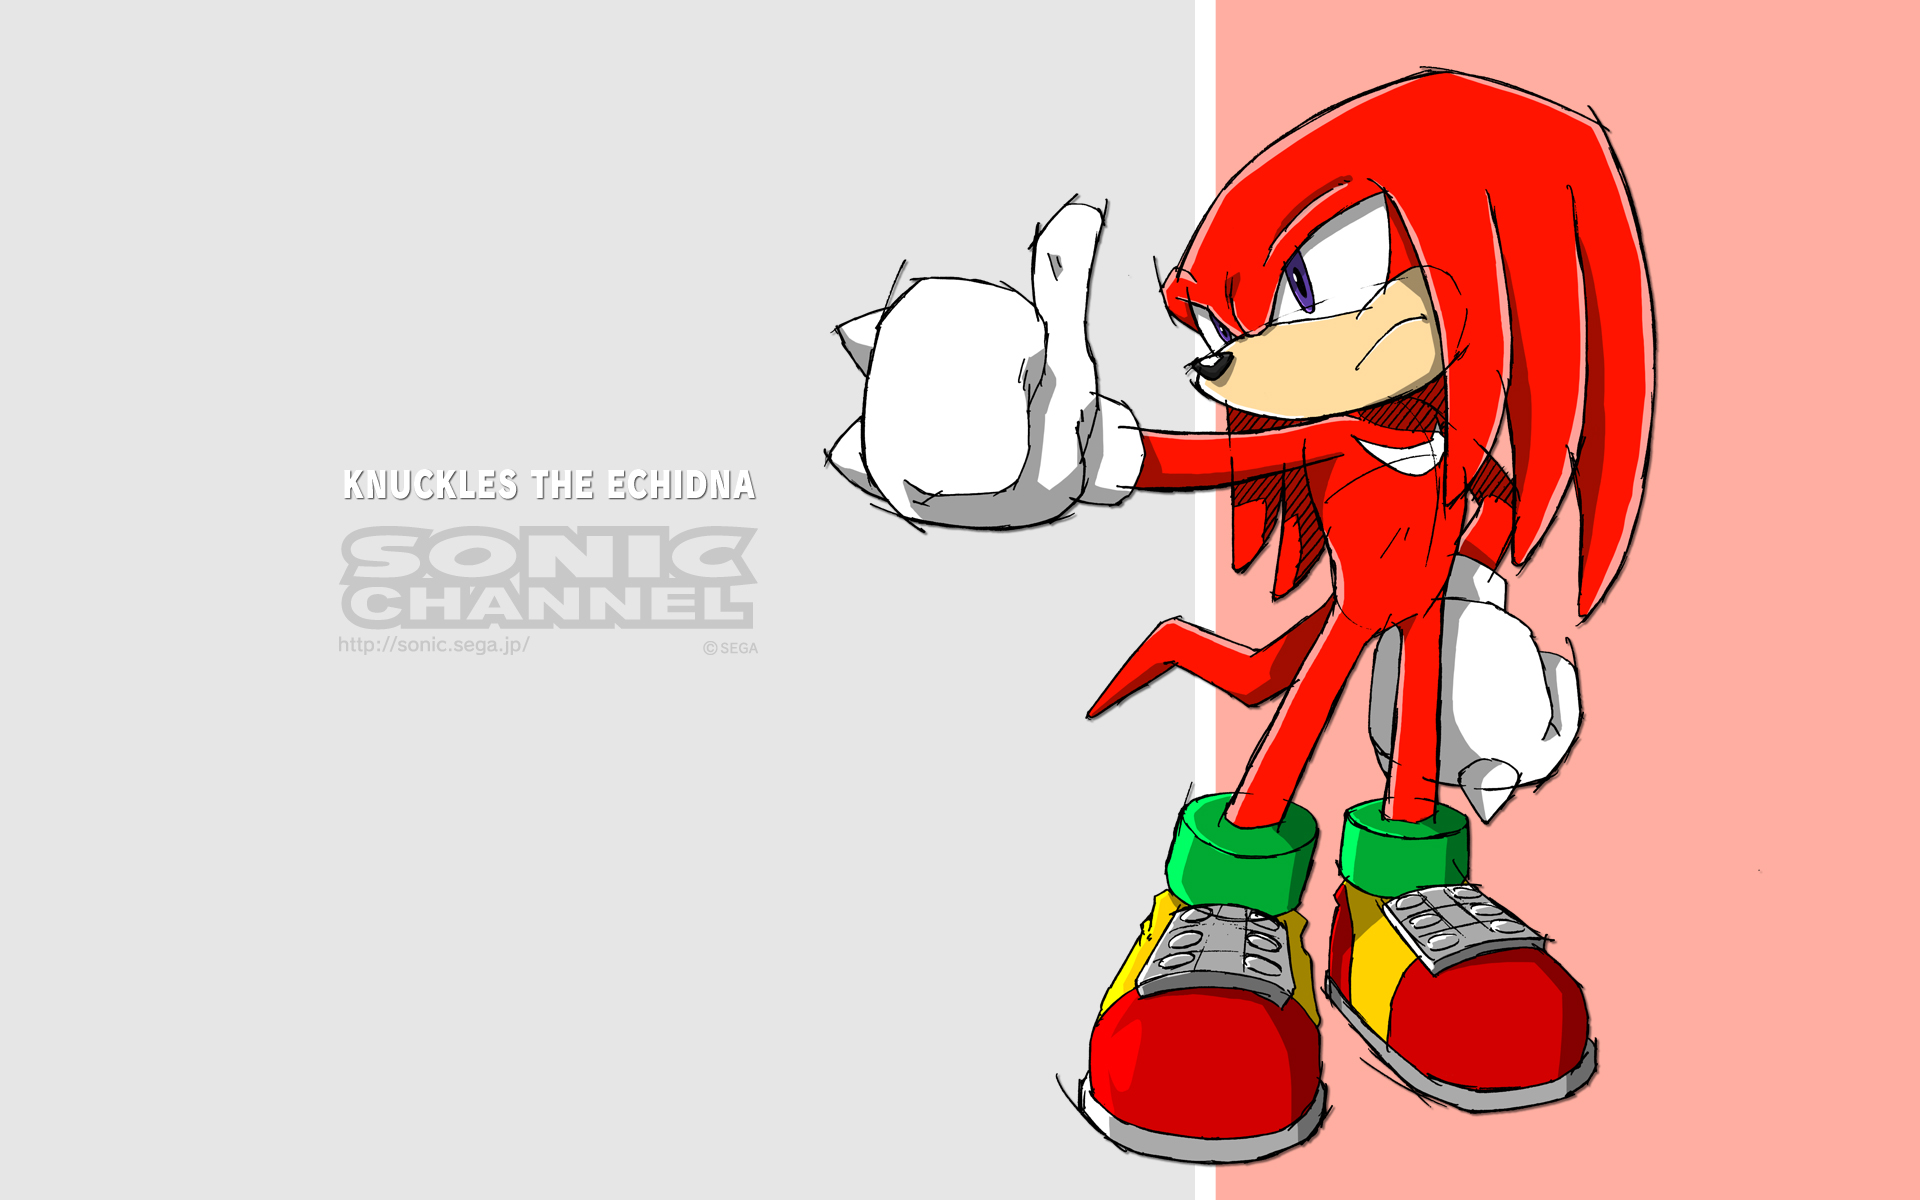 2012/08 - Knuckles the Echidna - Sonic Channel - Gallery - Sonic SCANF